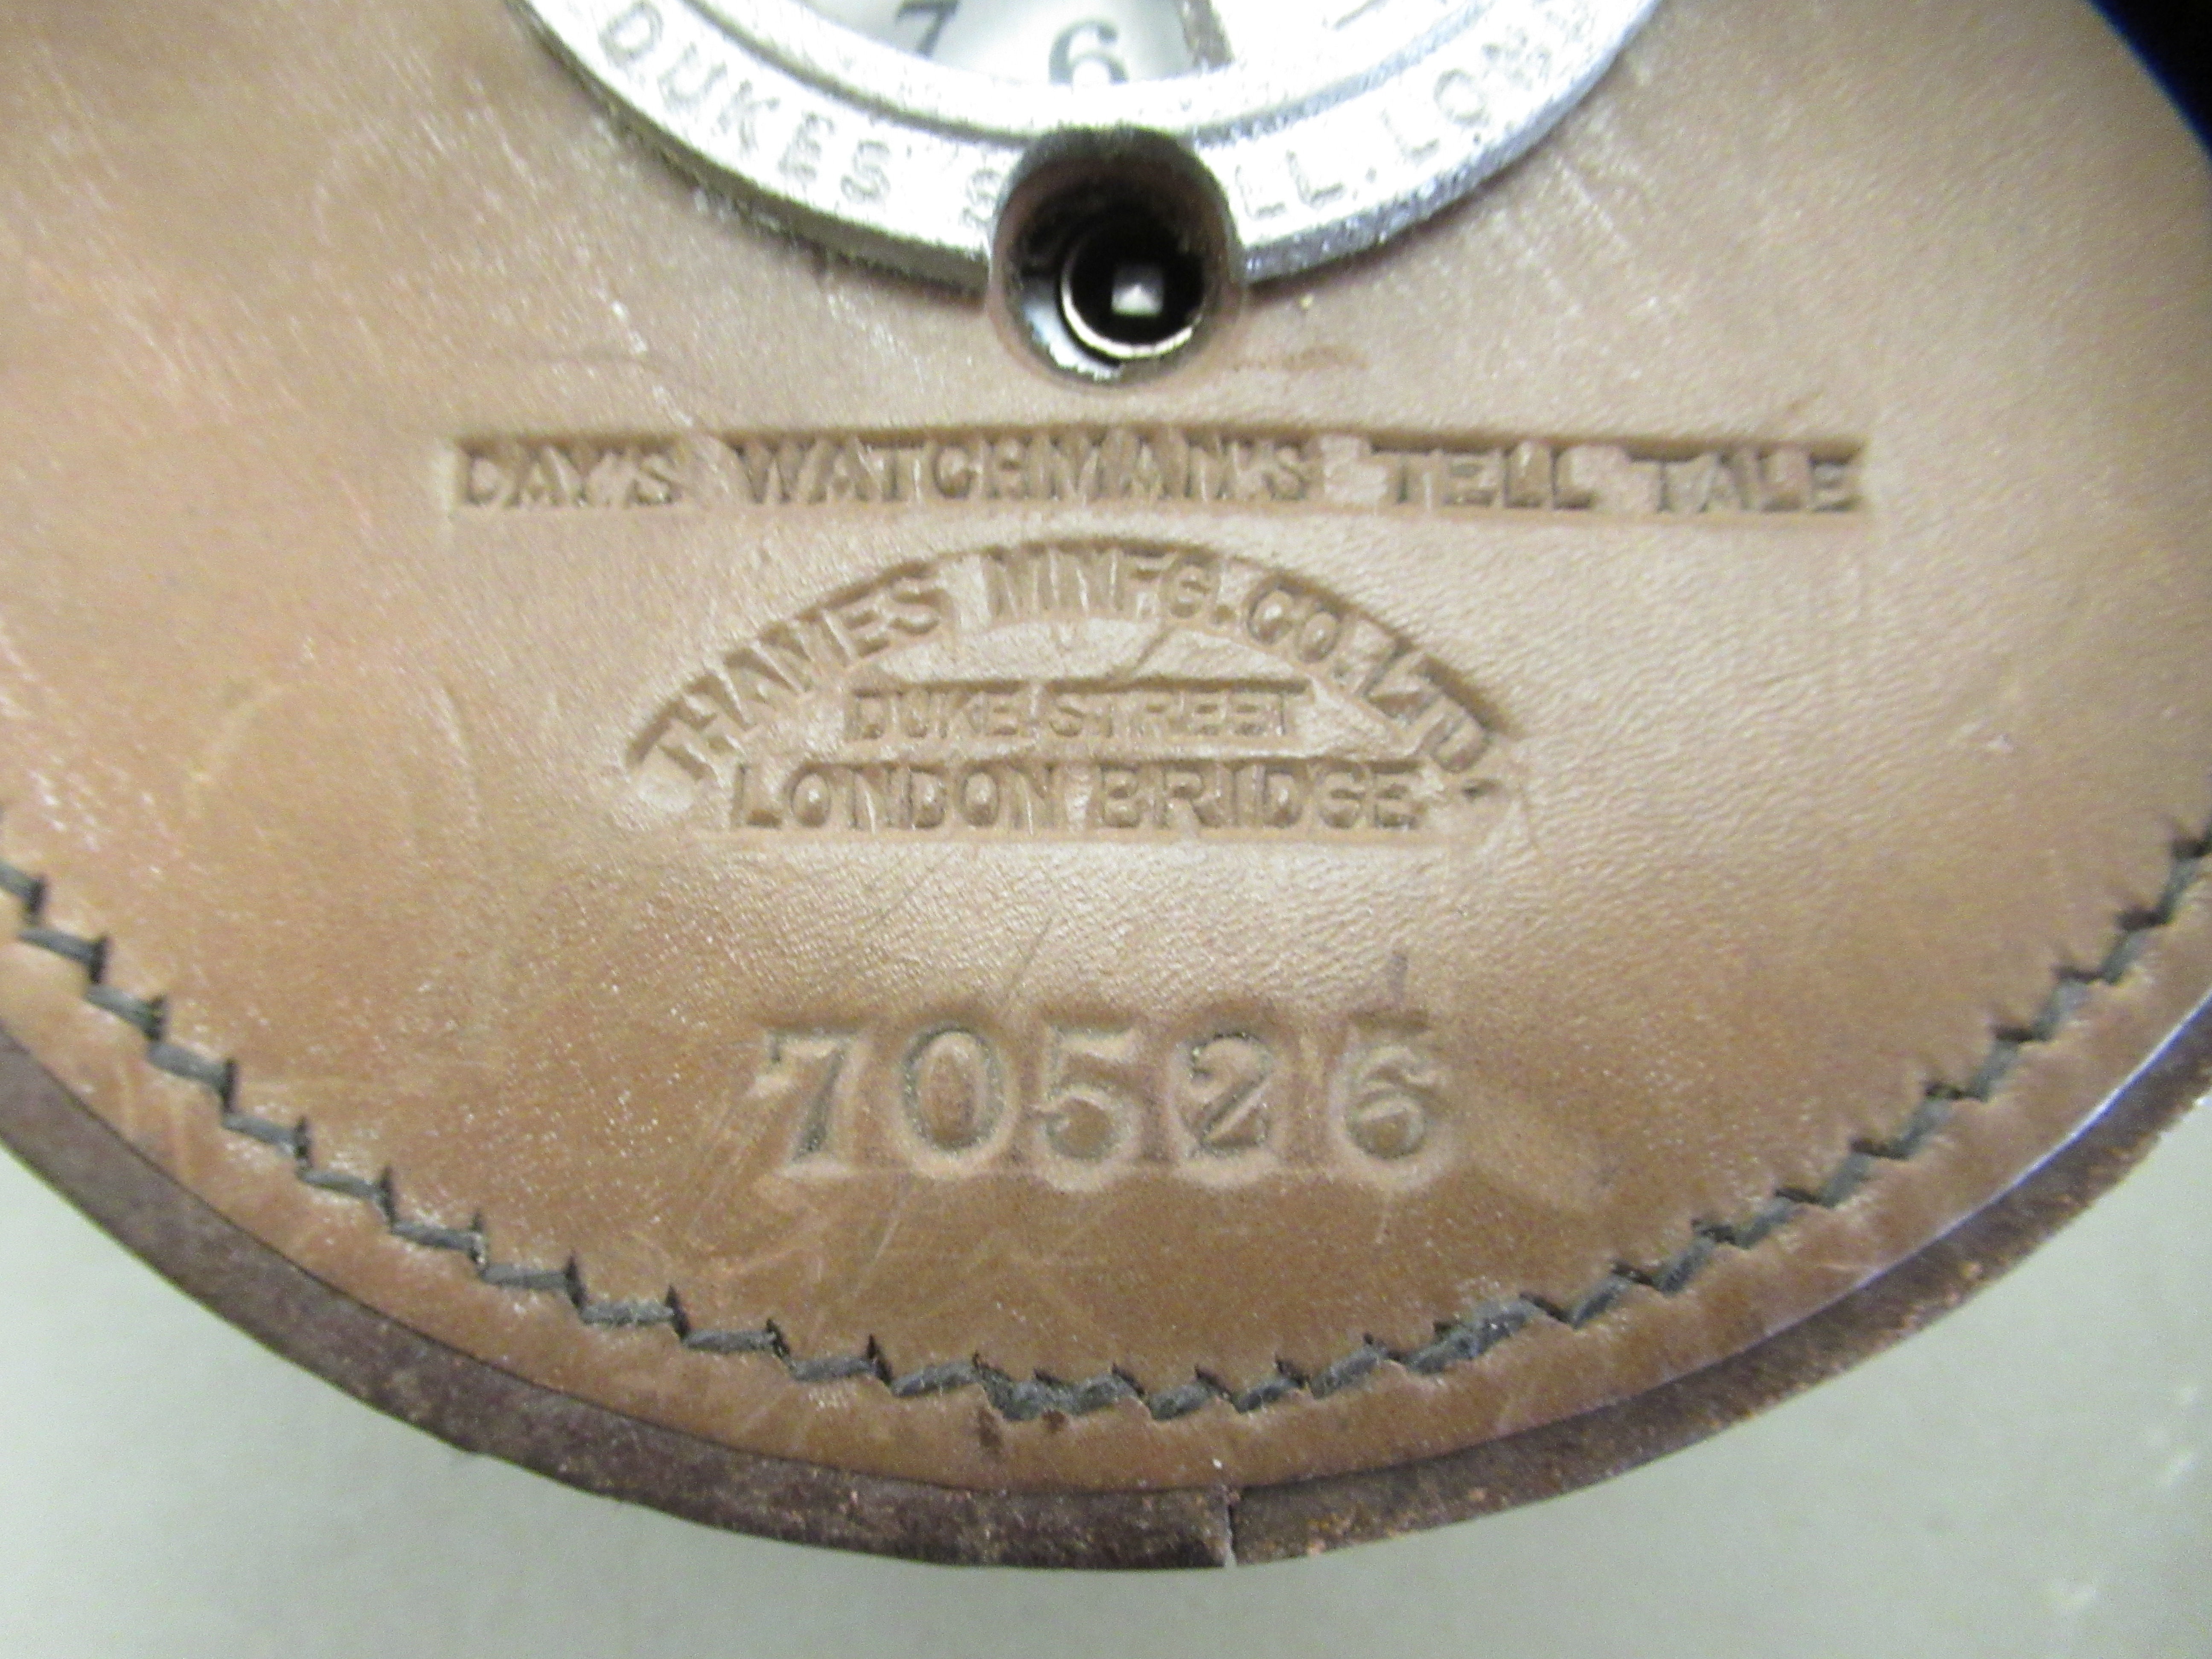 A Thames MNFG.Co.Ltd, London Bridge, Day's Watchman's Tell Tale, in a chromium plated steel case, - Image 7 of 7